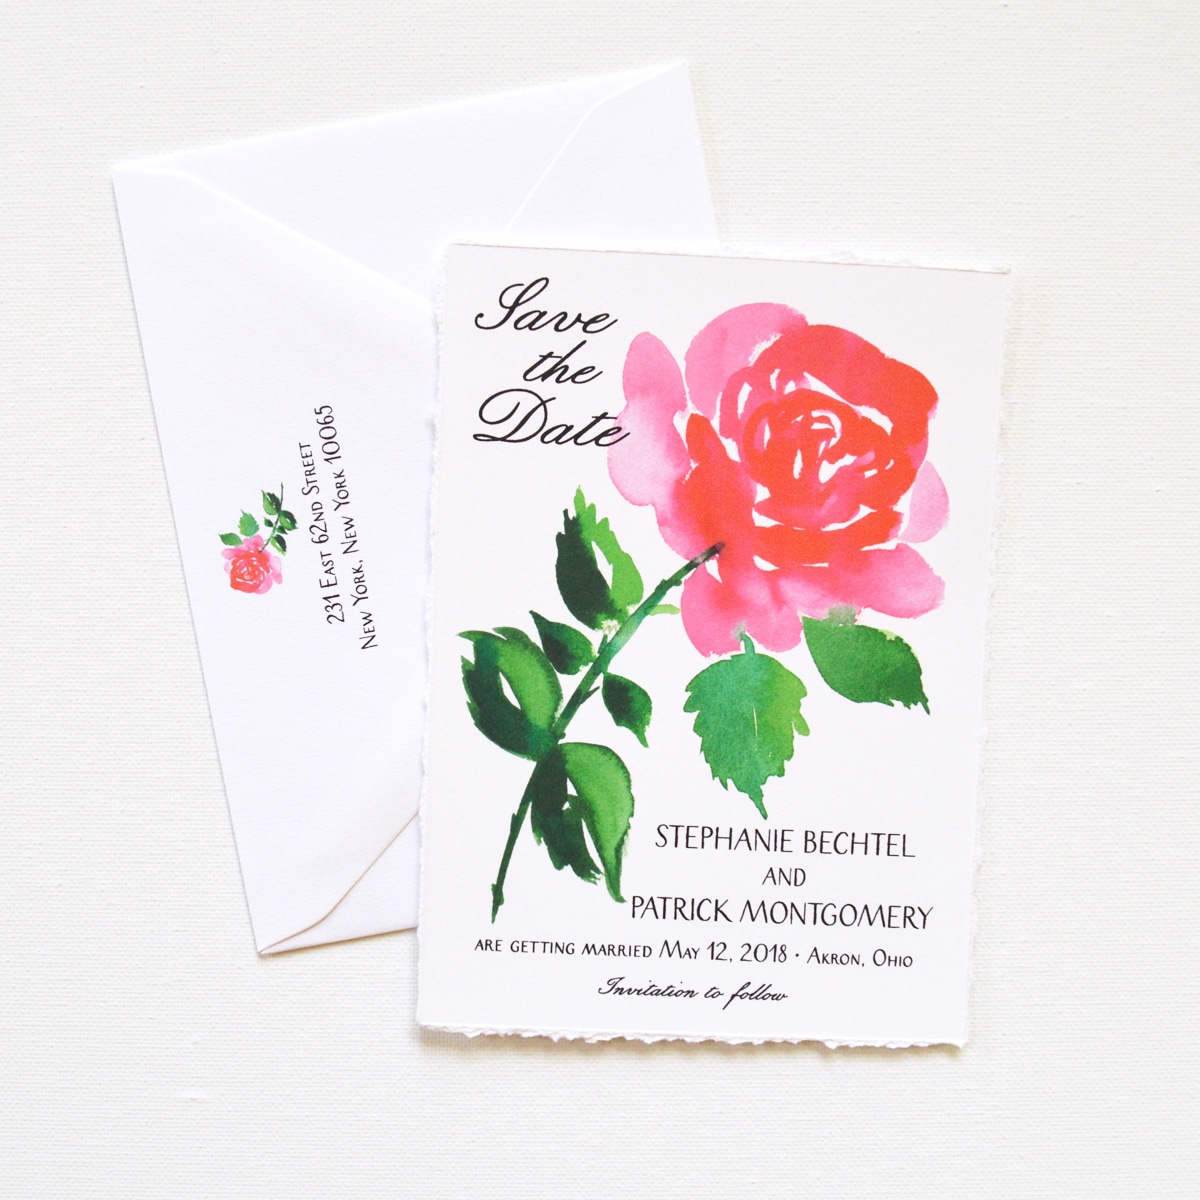 Custom save the dates with watercolor rose by artist Michelle Mospens. www.mospensstudio.com